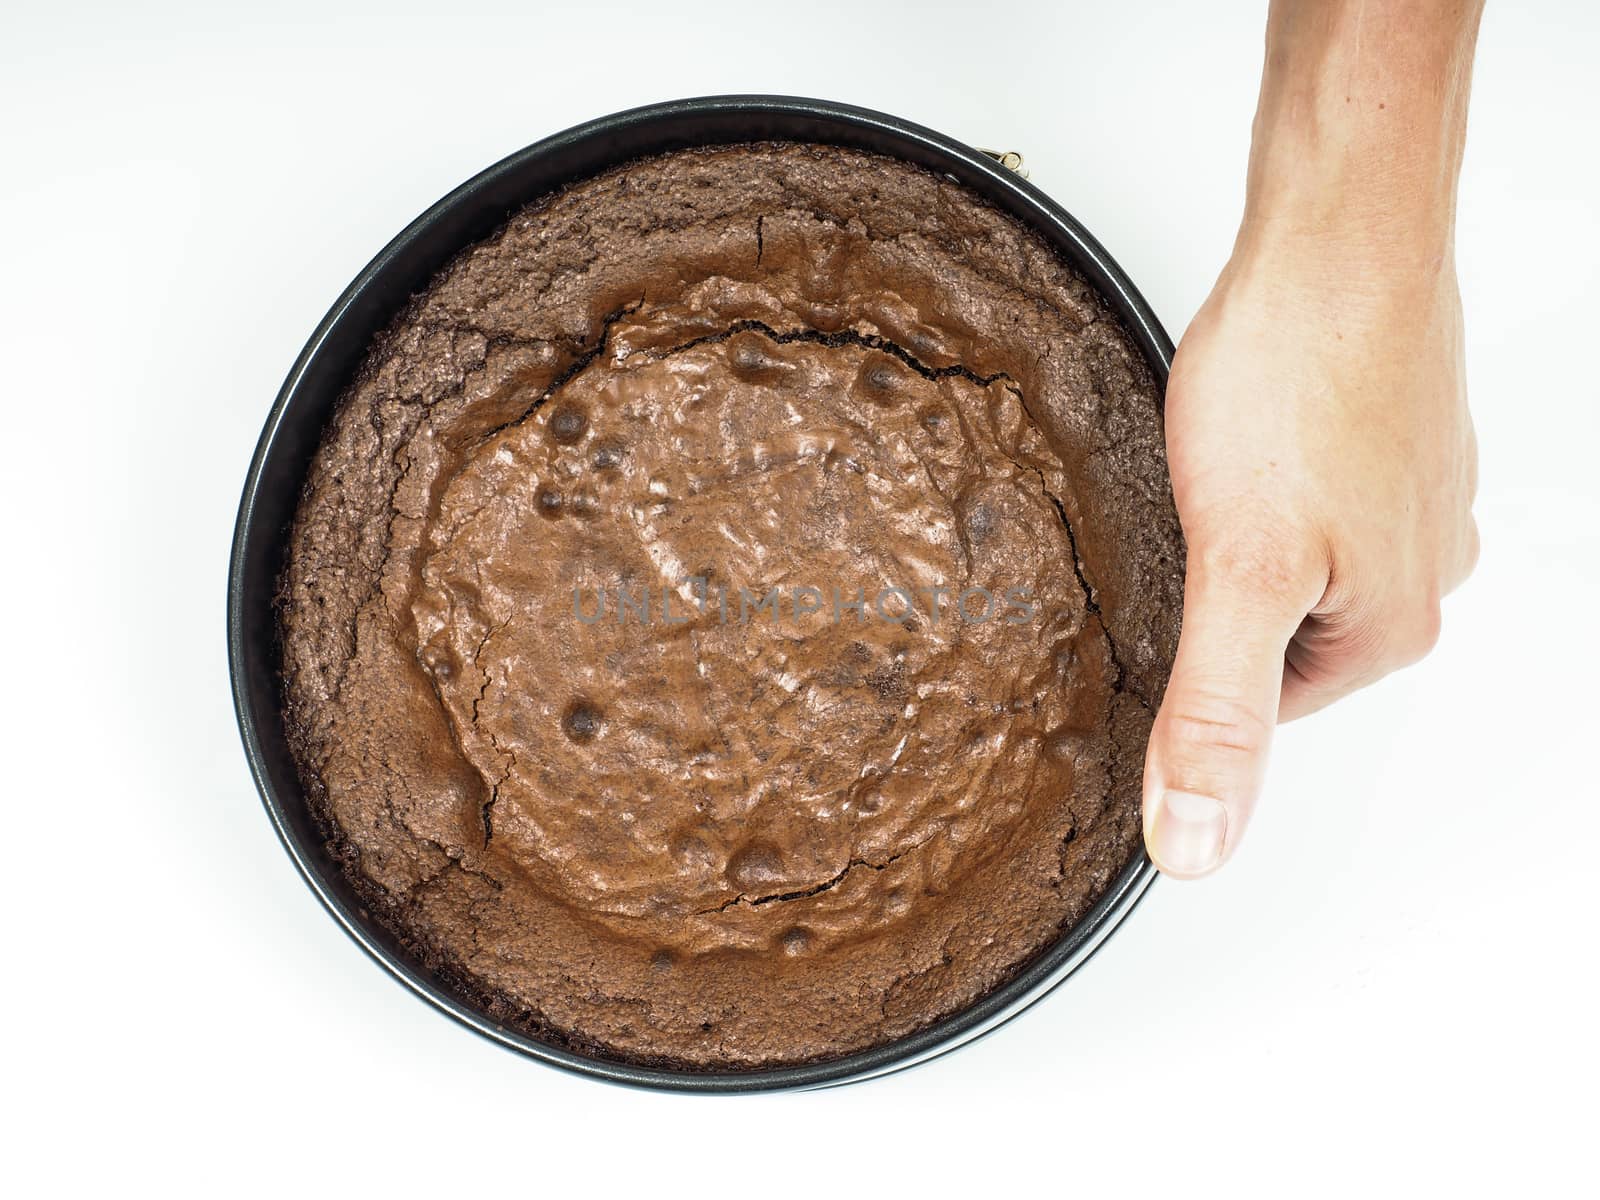 Freshly made chocolate cake in a round shape held by a person